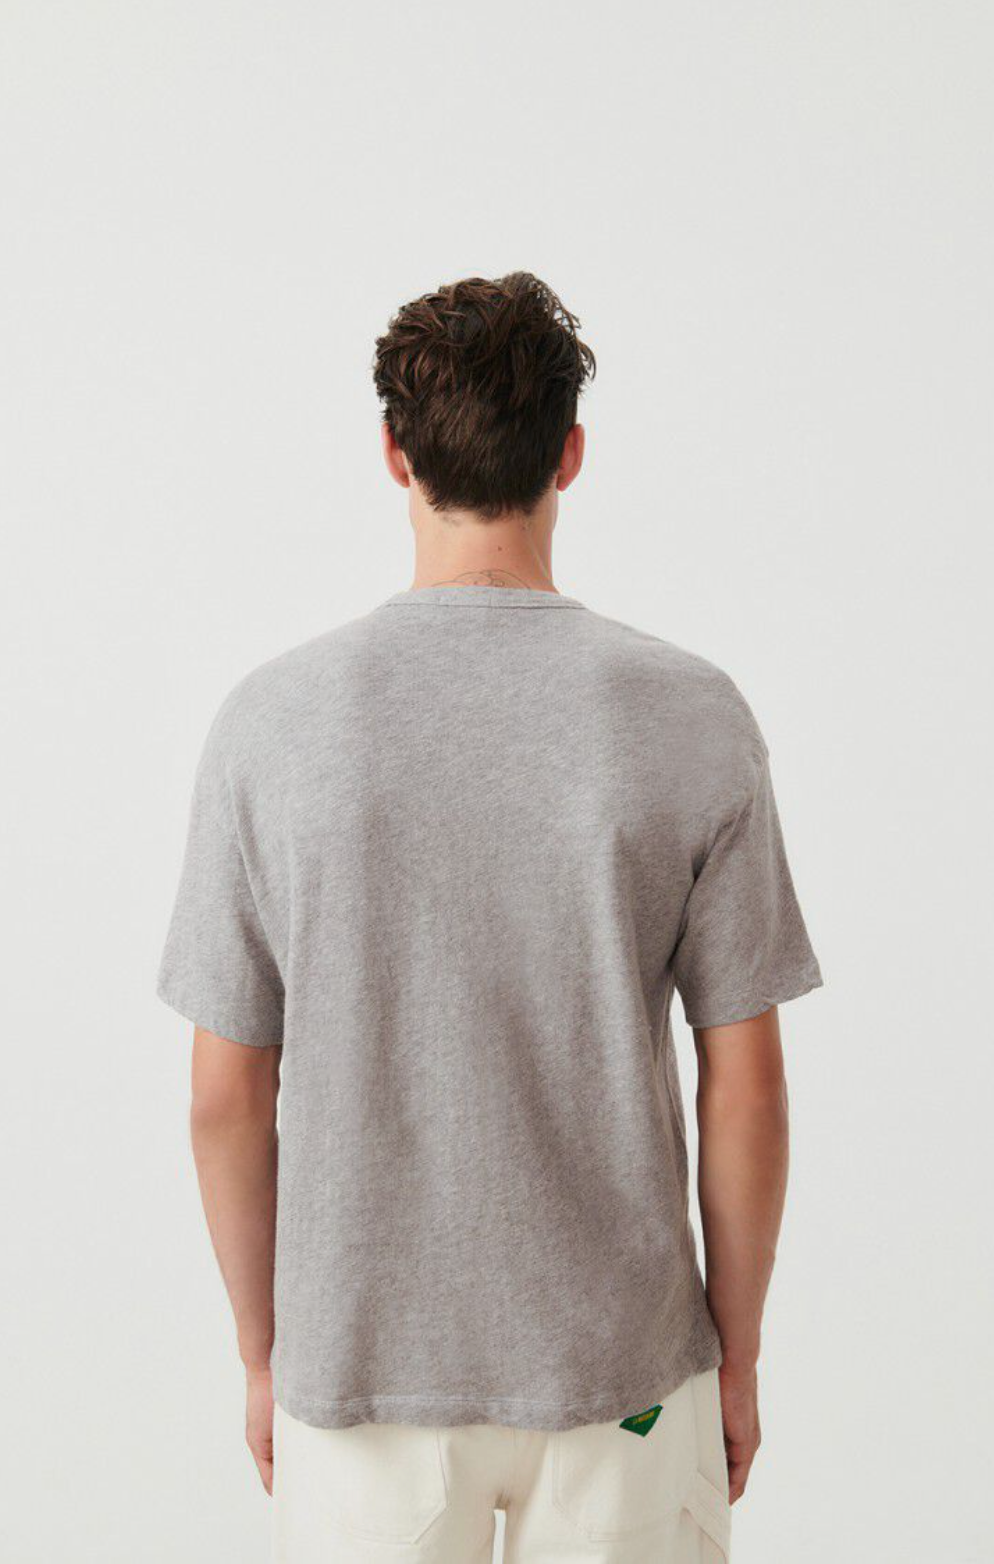 A medium close up image of the back side of a male model wearing the Sonoma T-shirt in grey